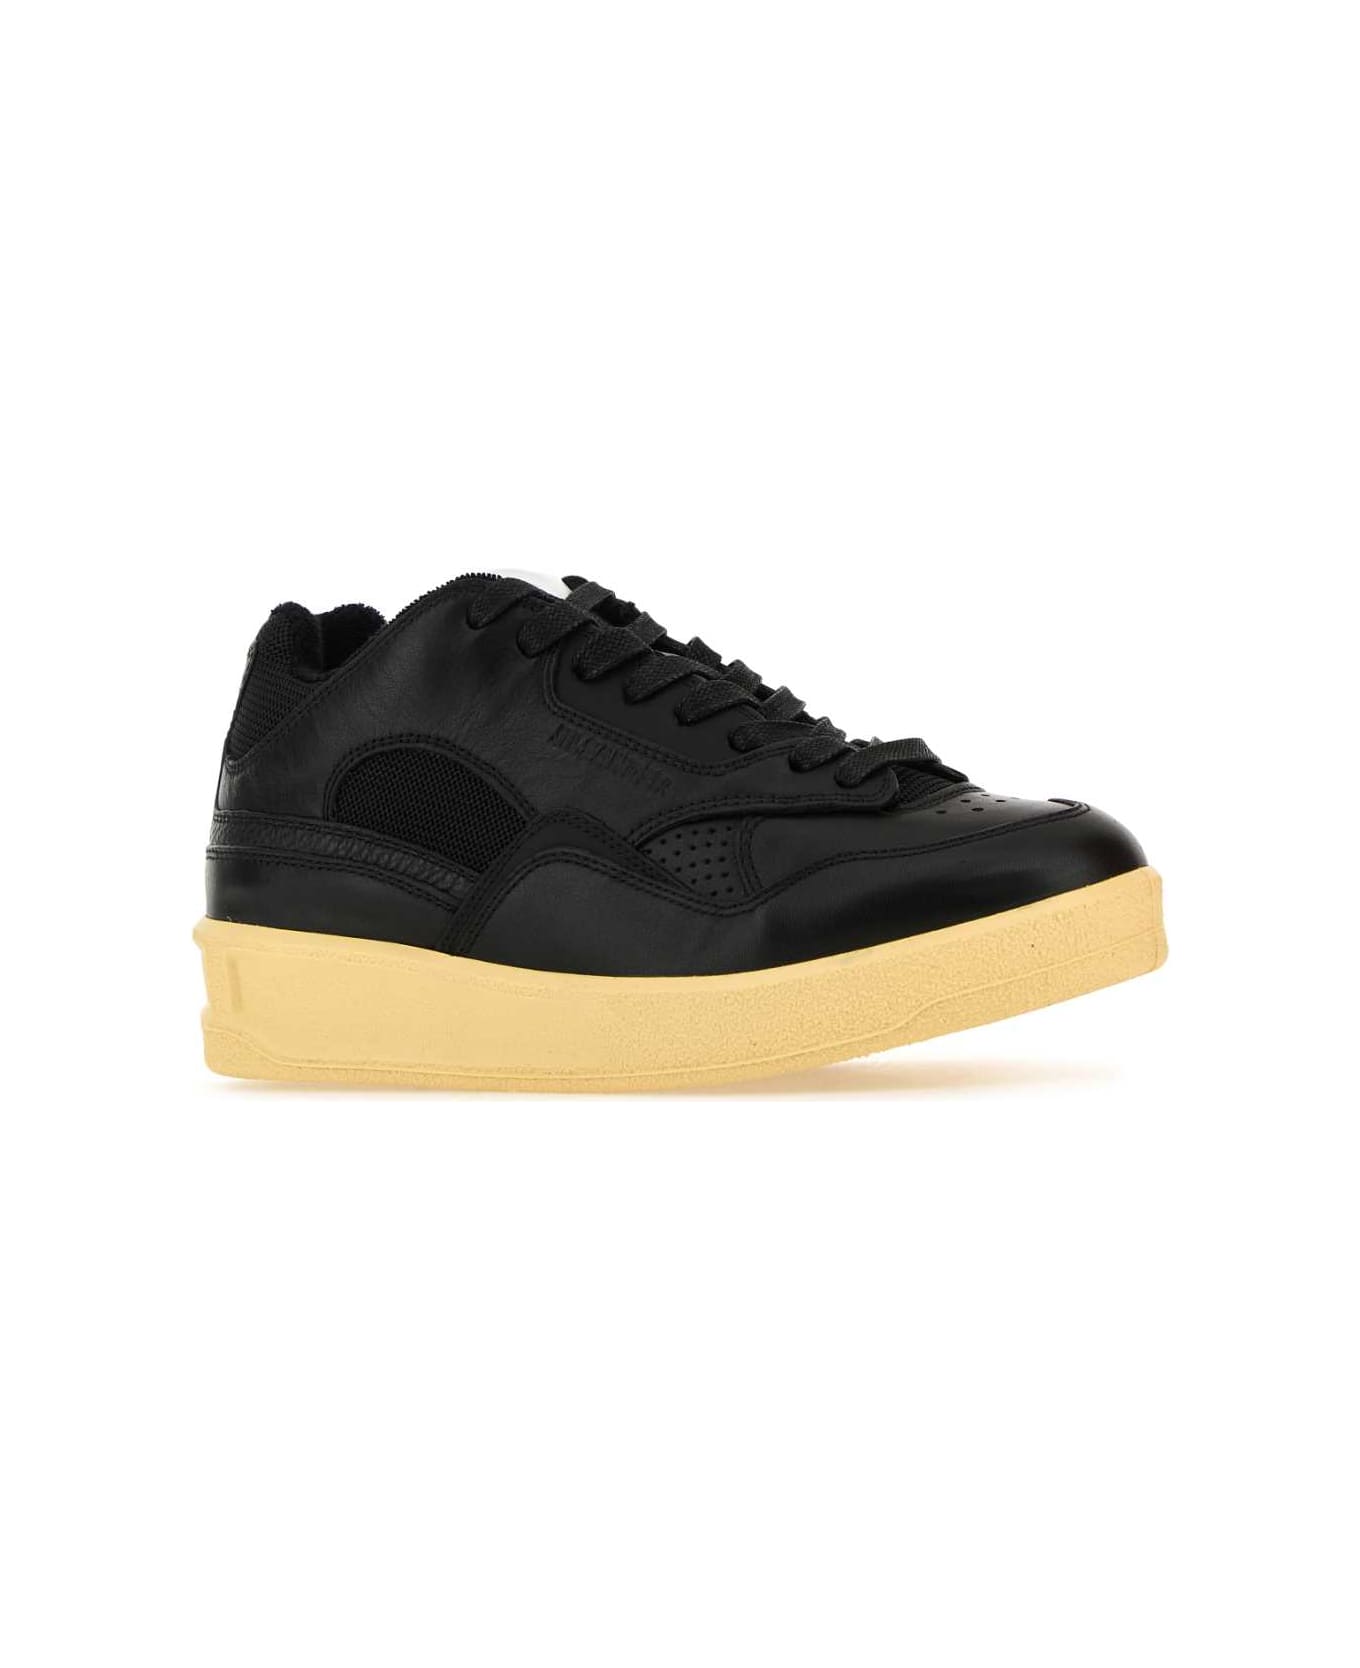 Jil Sander Black Leather And Fabric Basket Sneakers - 001